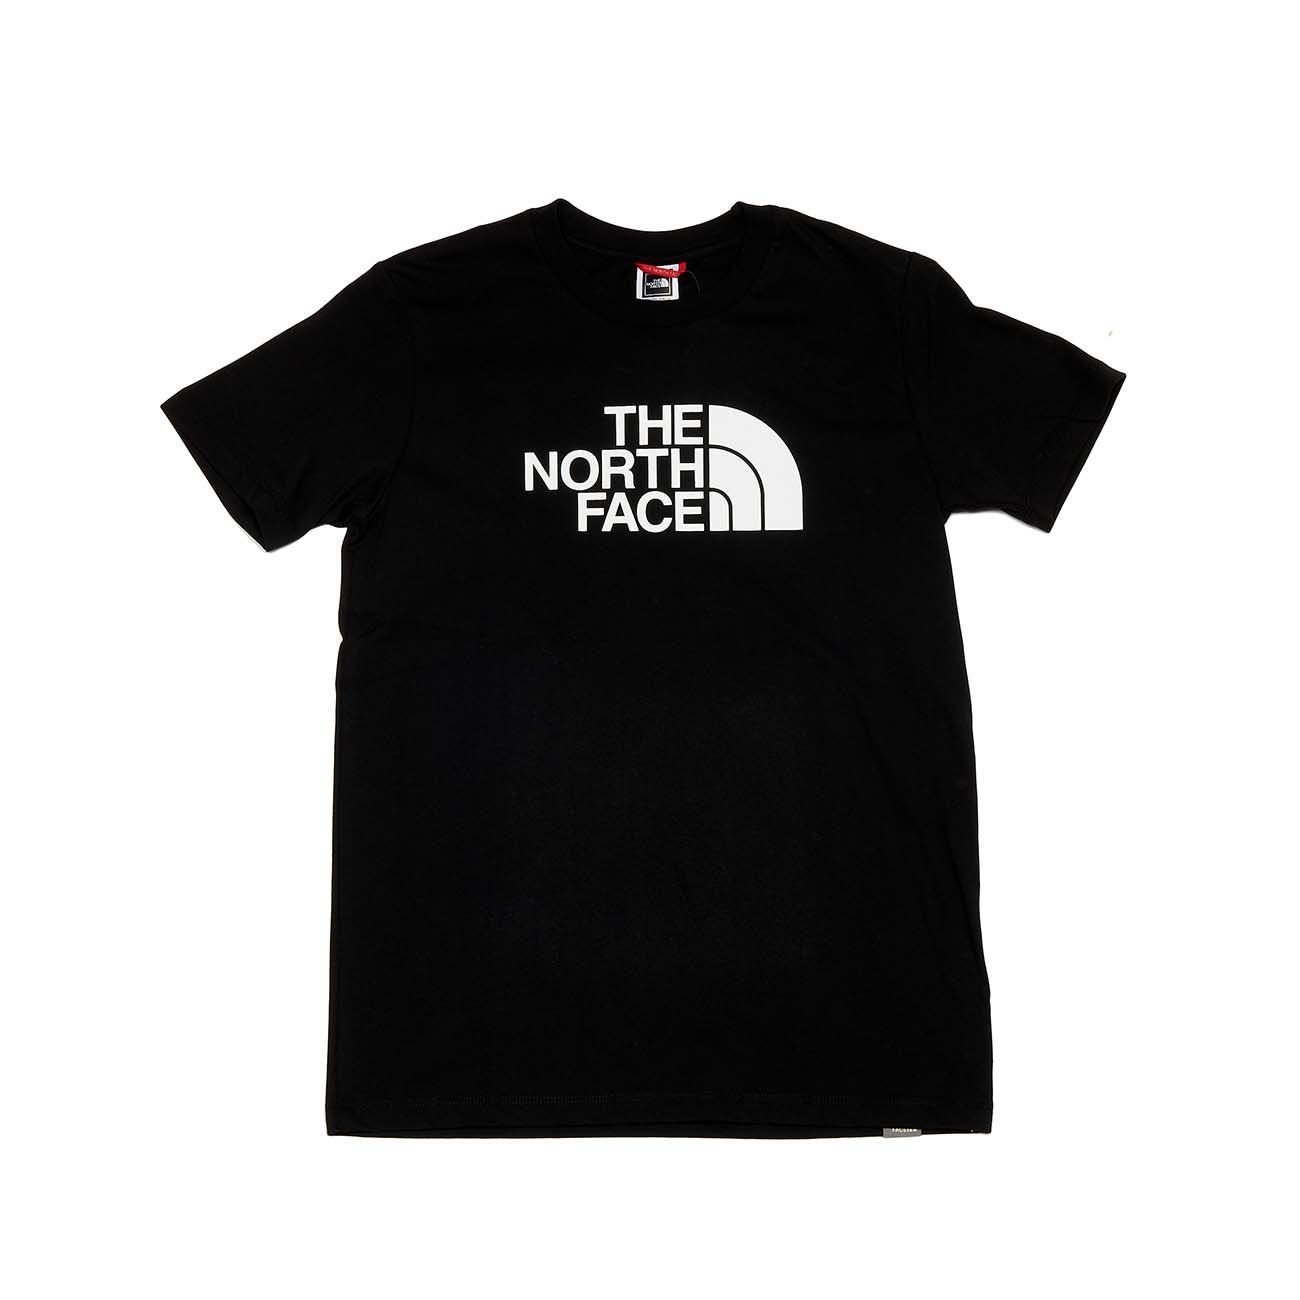 woede kiespijn Rodeo THE NORTH FACE EASY T-SHIRT WITH LOGO Man Black White | Mascheroni Store